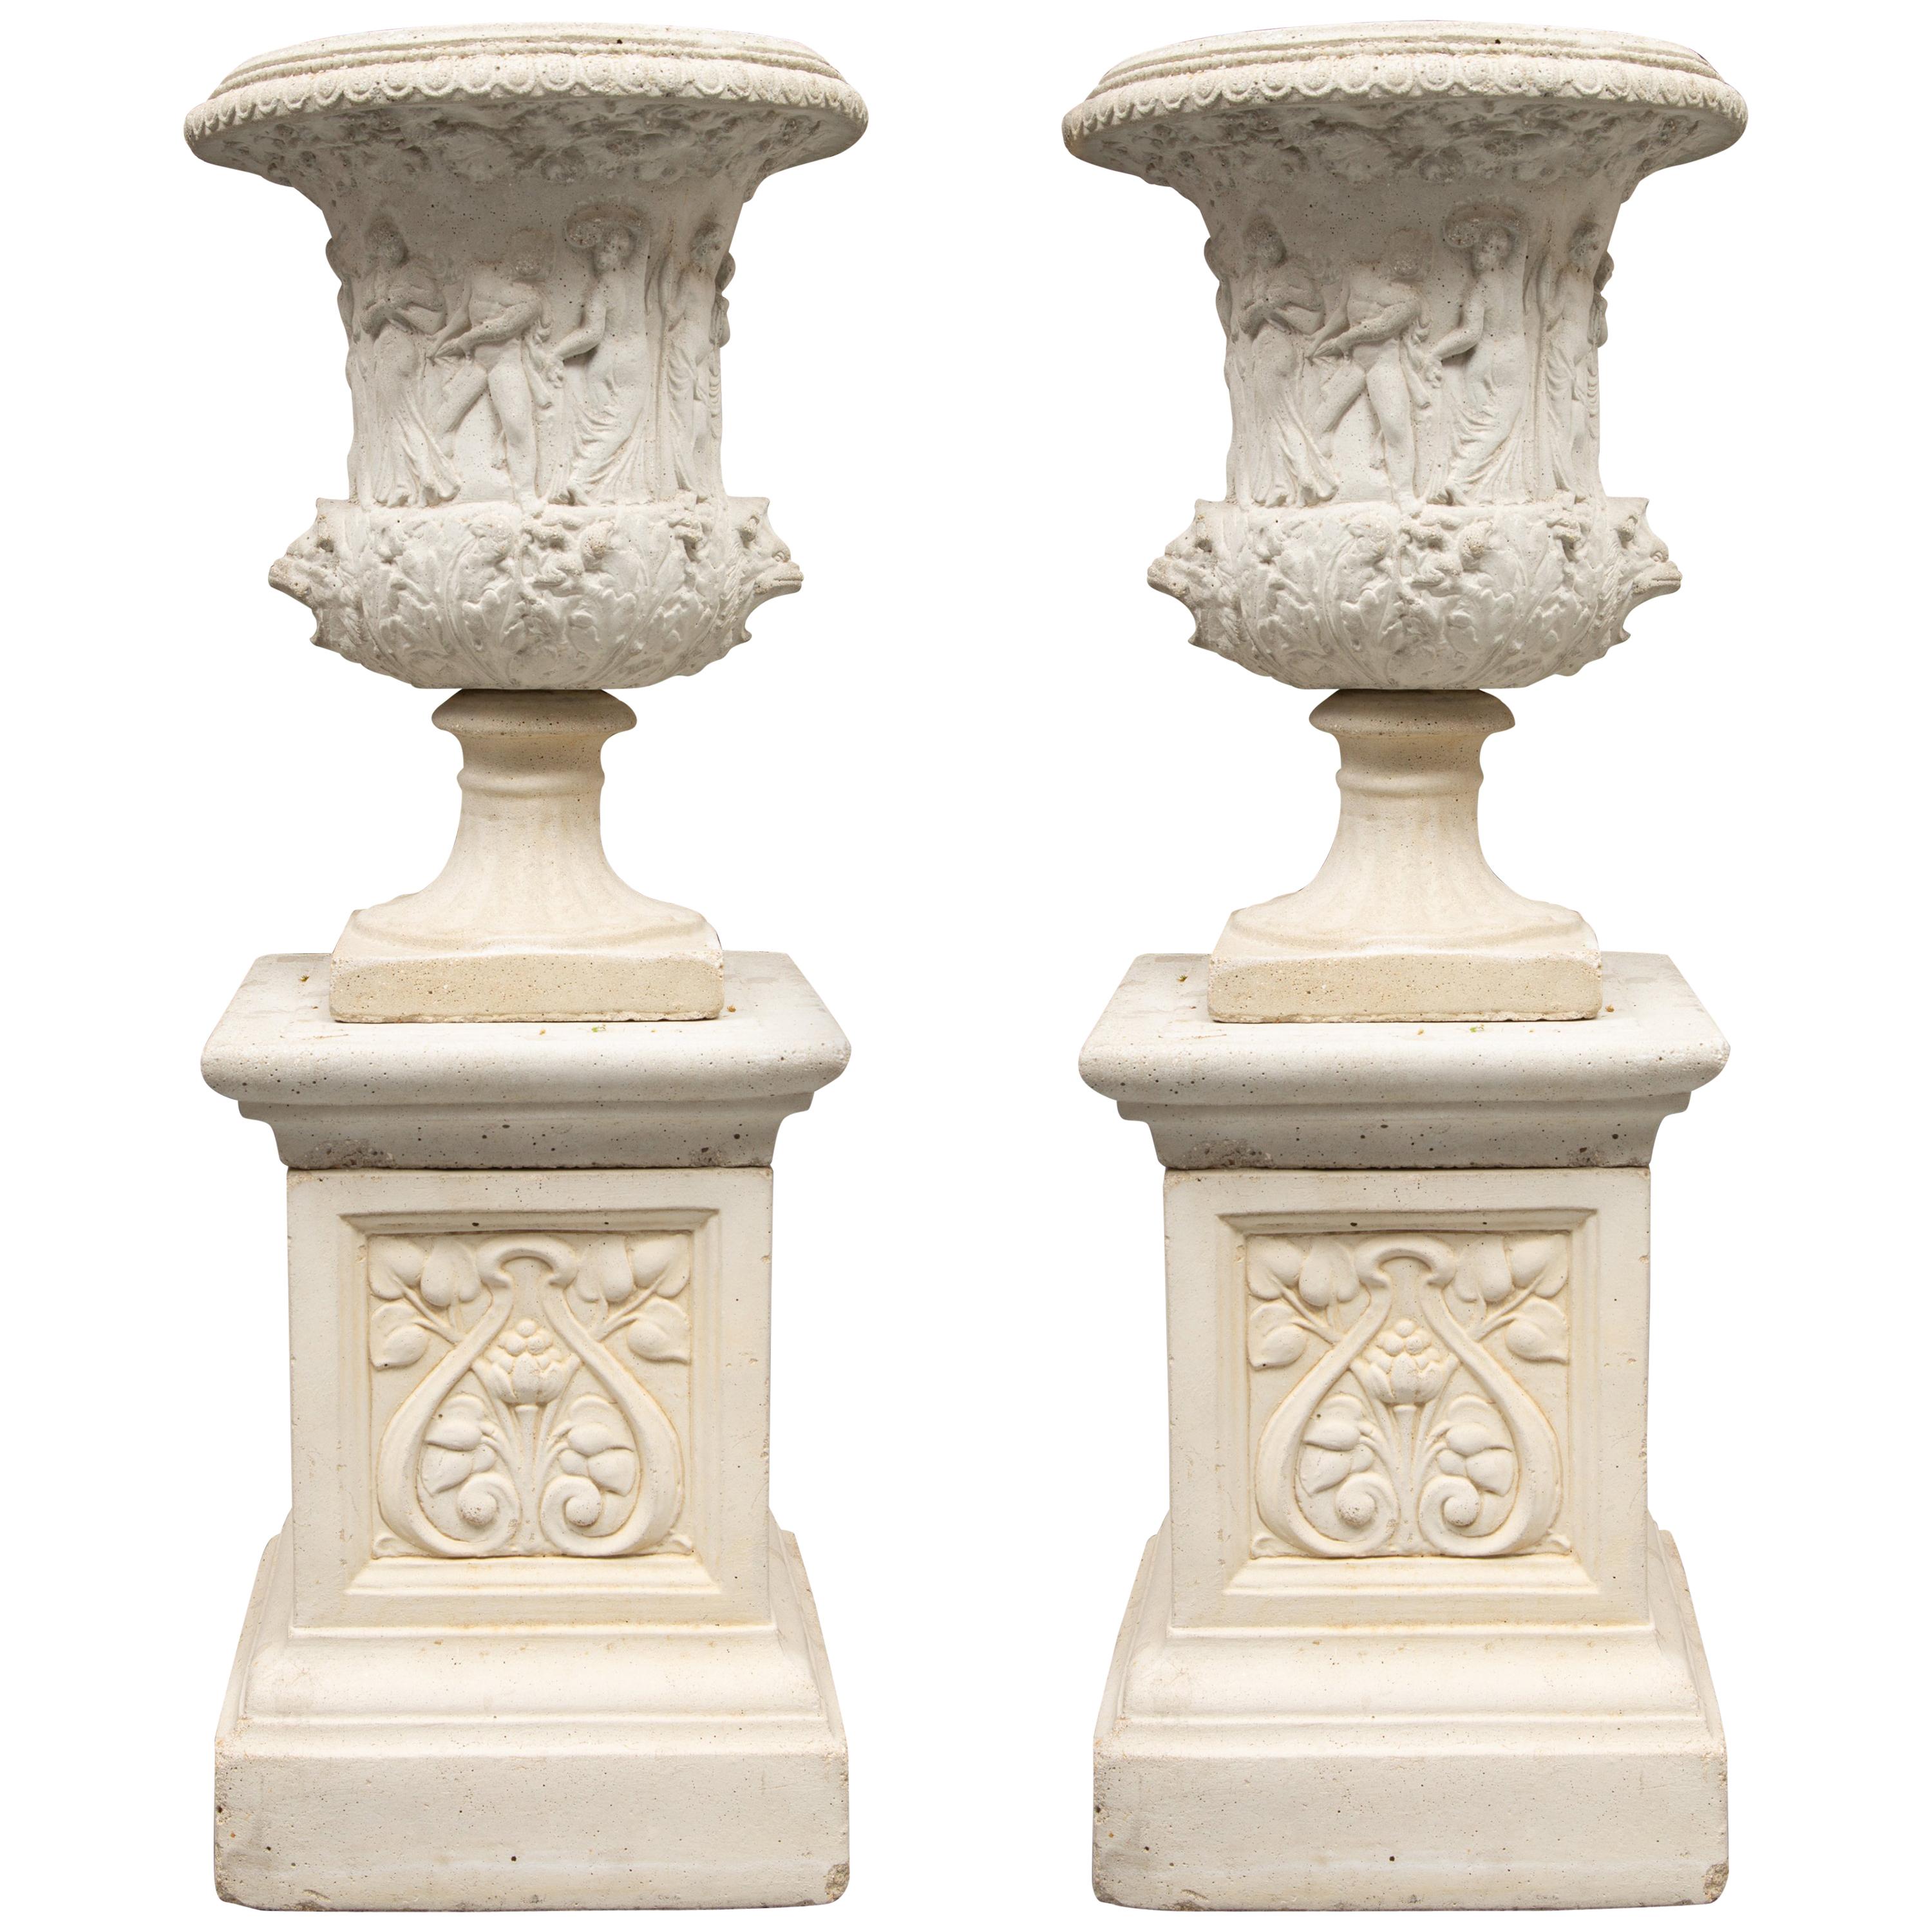 Pair of Cast Neoclassical Urns on Plinths